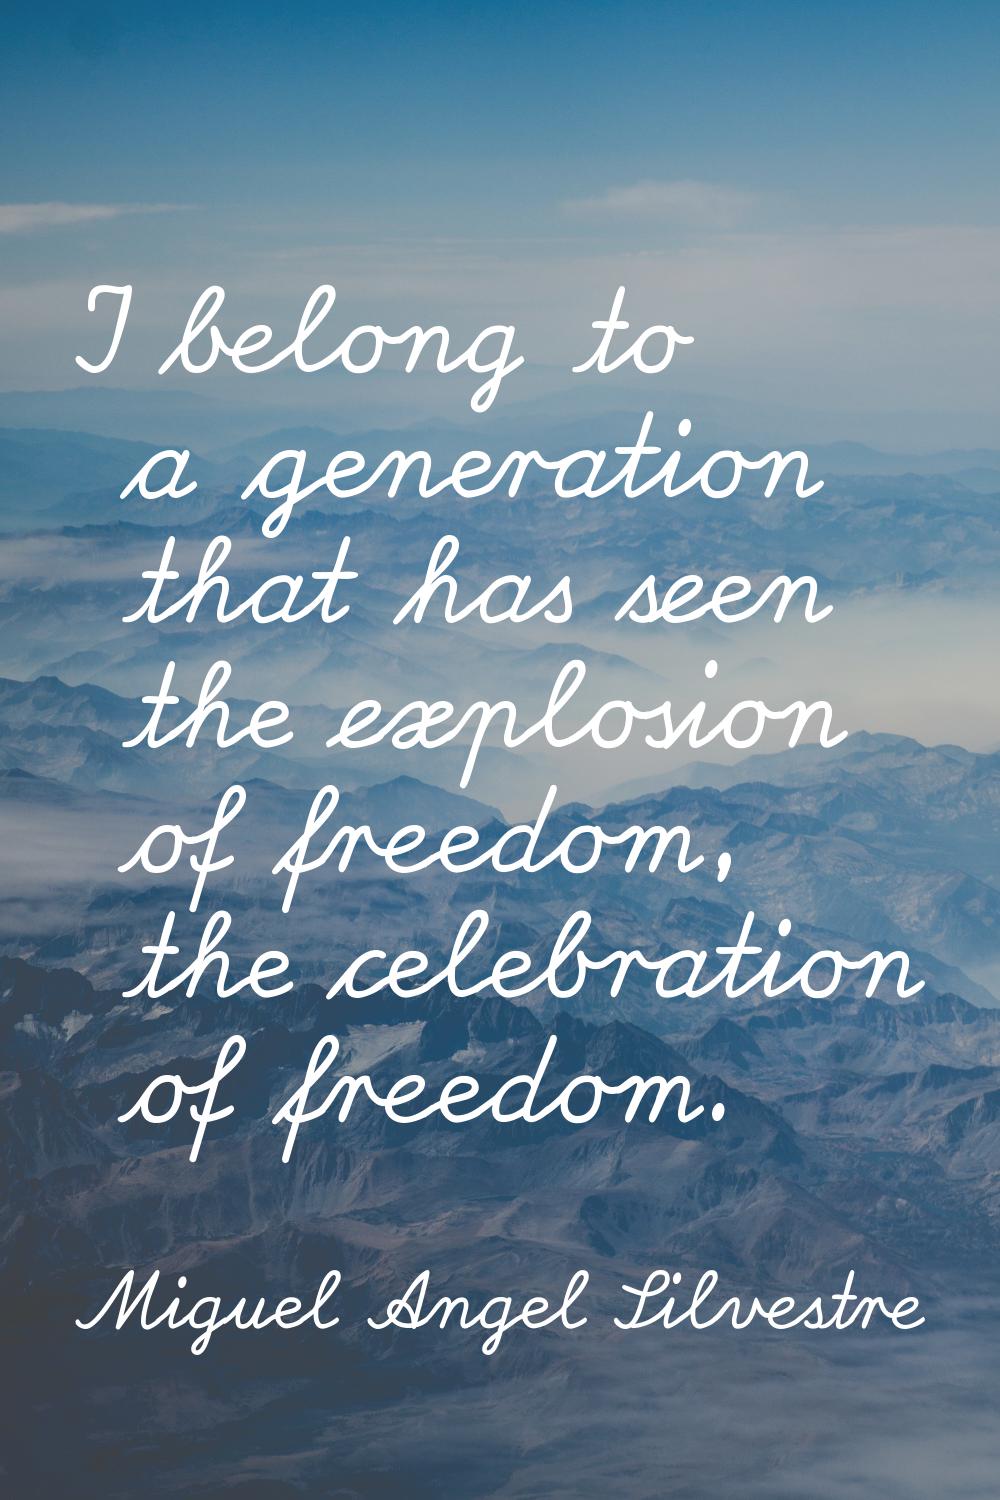 I belong to a generation that has seen the explosion of freedom, the celebration of freedom.